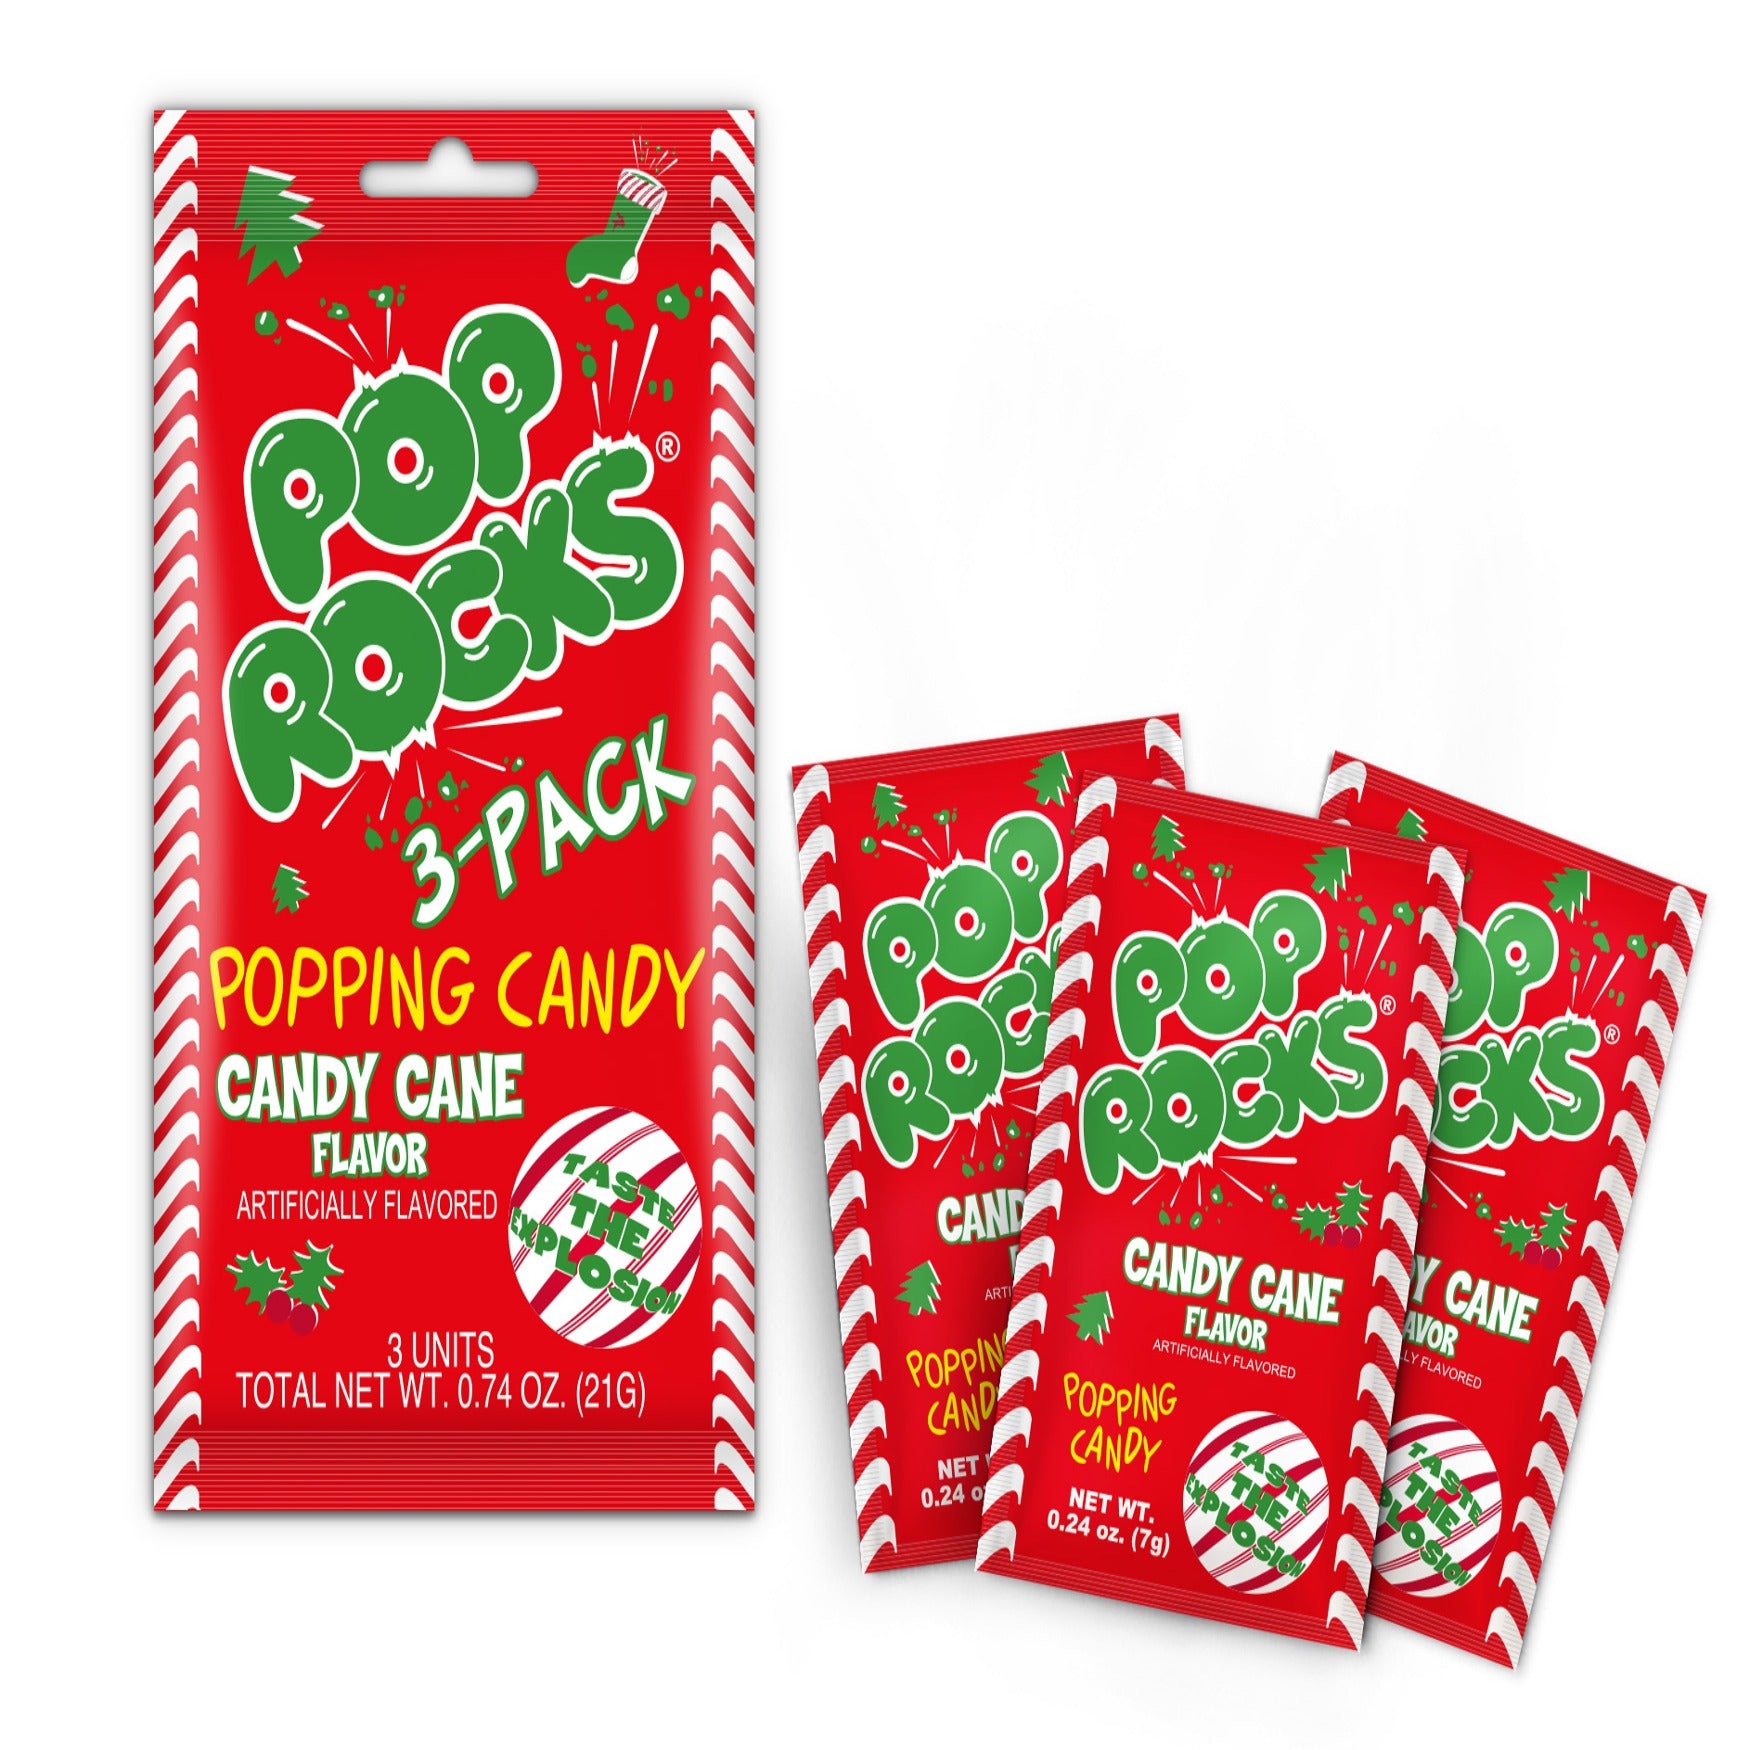 Pop Rocks Candy Cane Popping Candy, 3 pack, 0.74oz